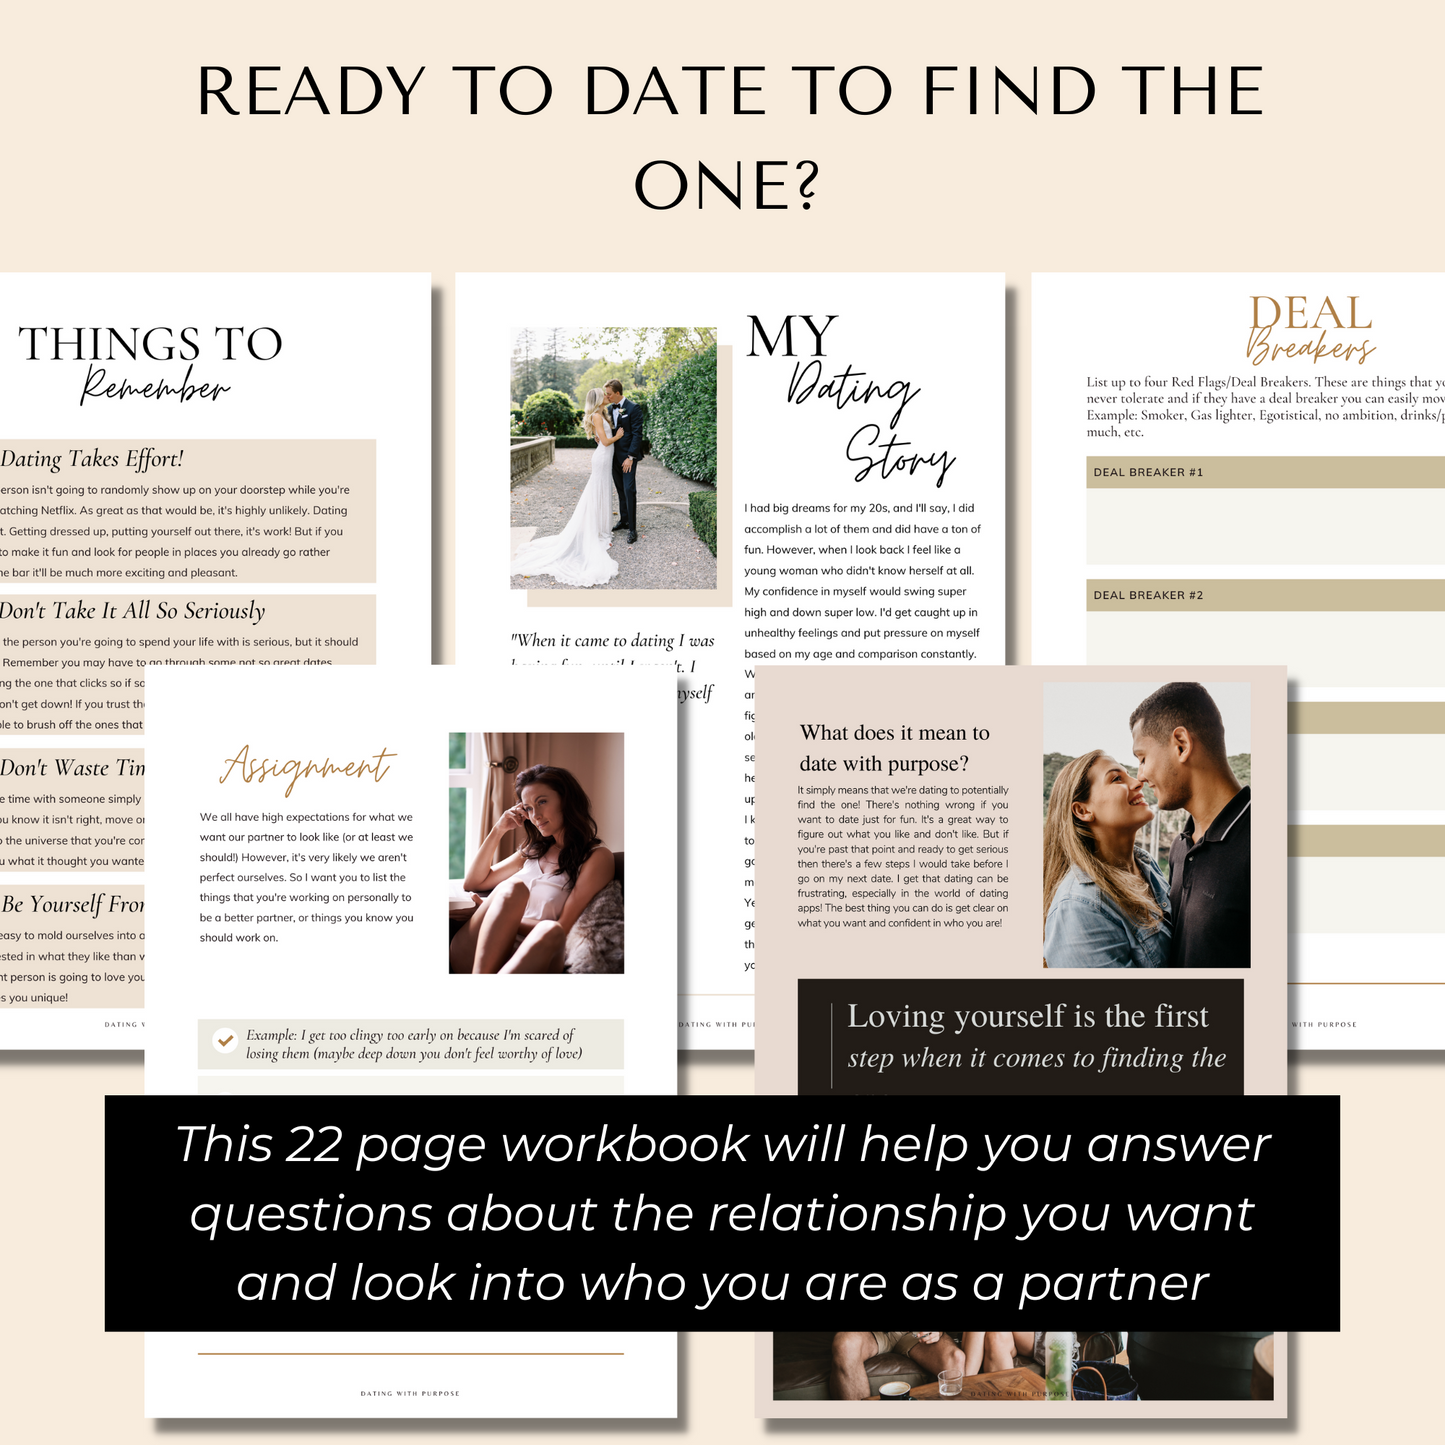 The Guide To Dating With Purpose